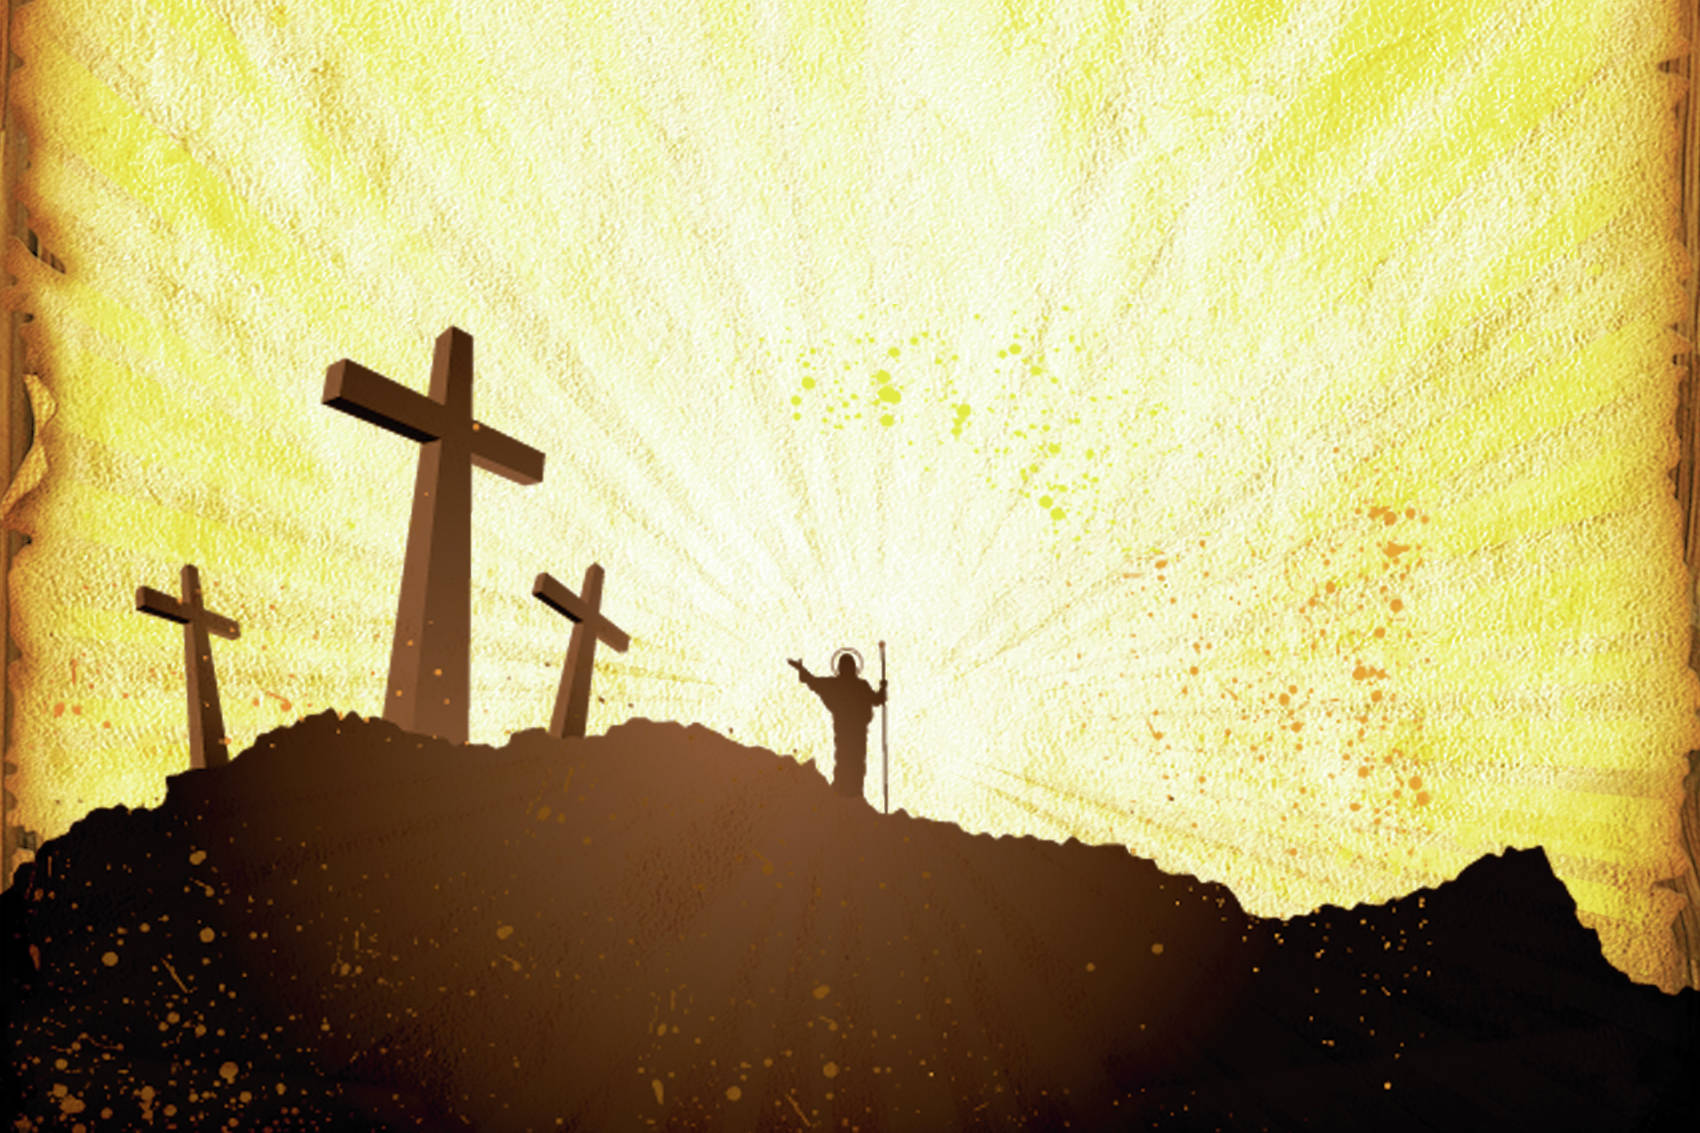 Minister’s Message: Rejoice in the resurrection